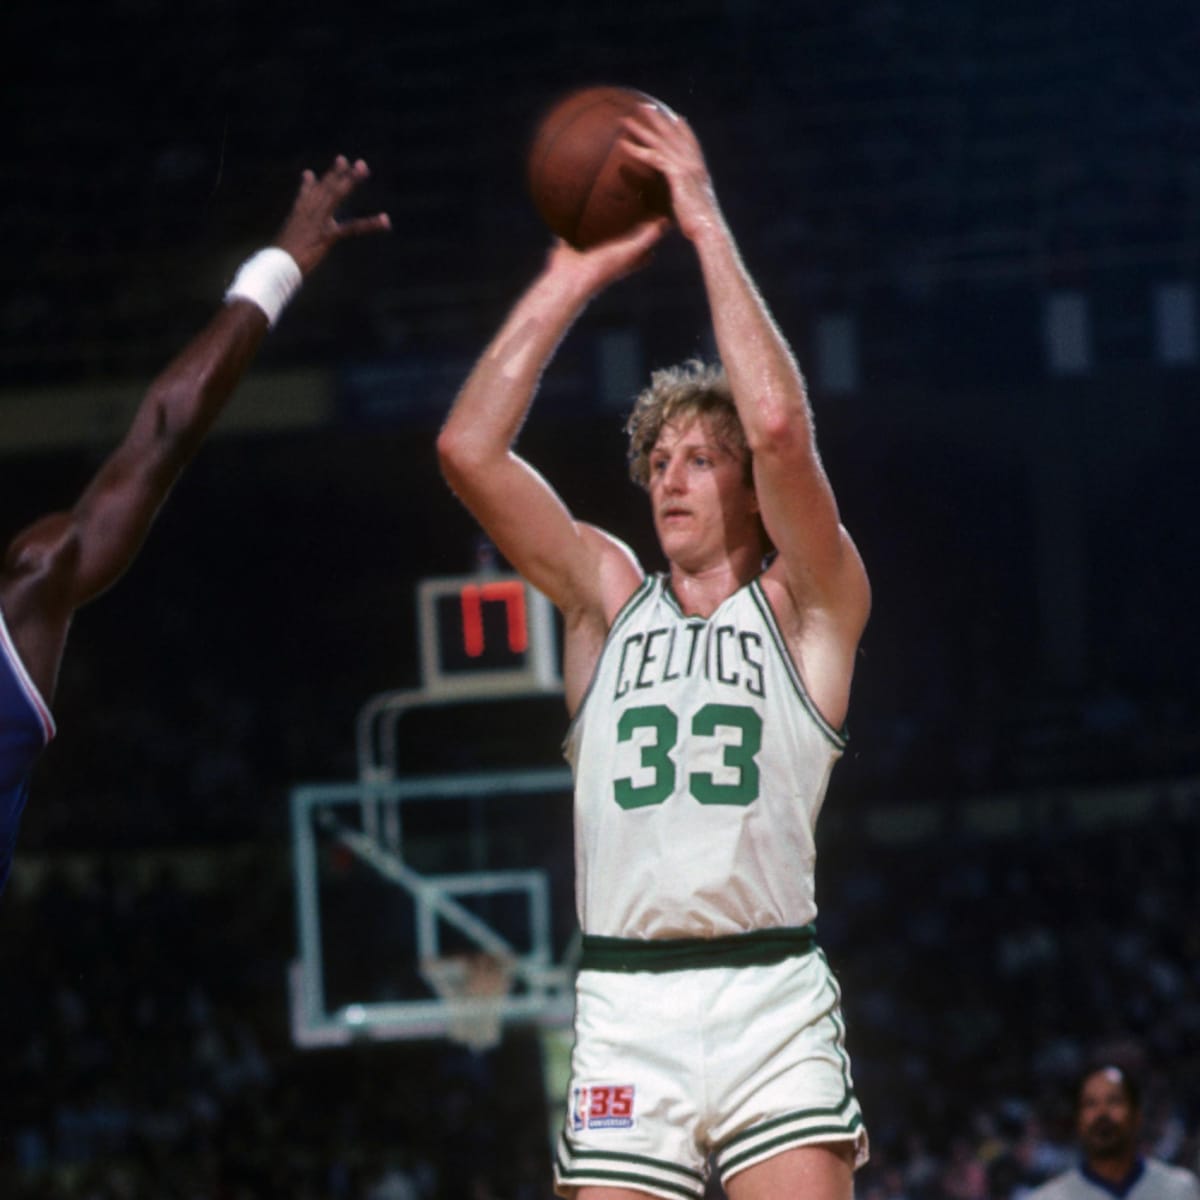 Larry Bird Explains How He Was Always Two Steps Ahead Of His Opponents, Fadeaway World